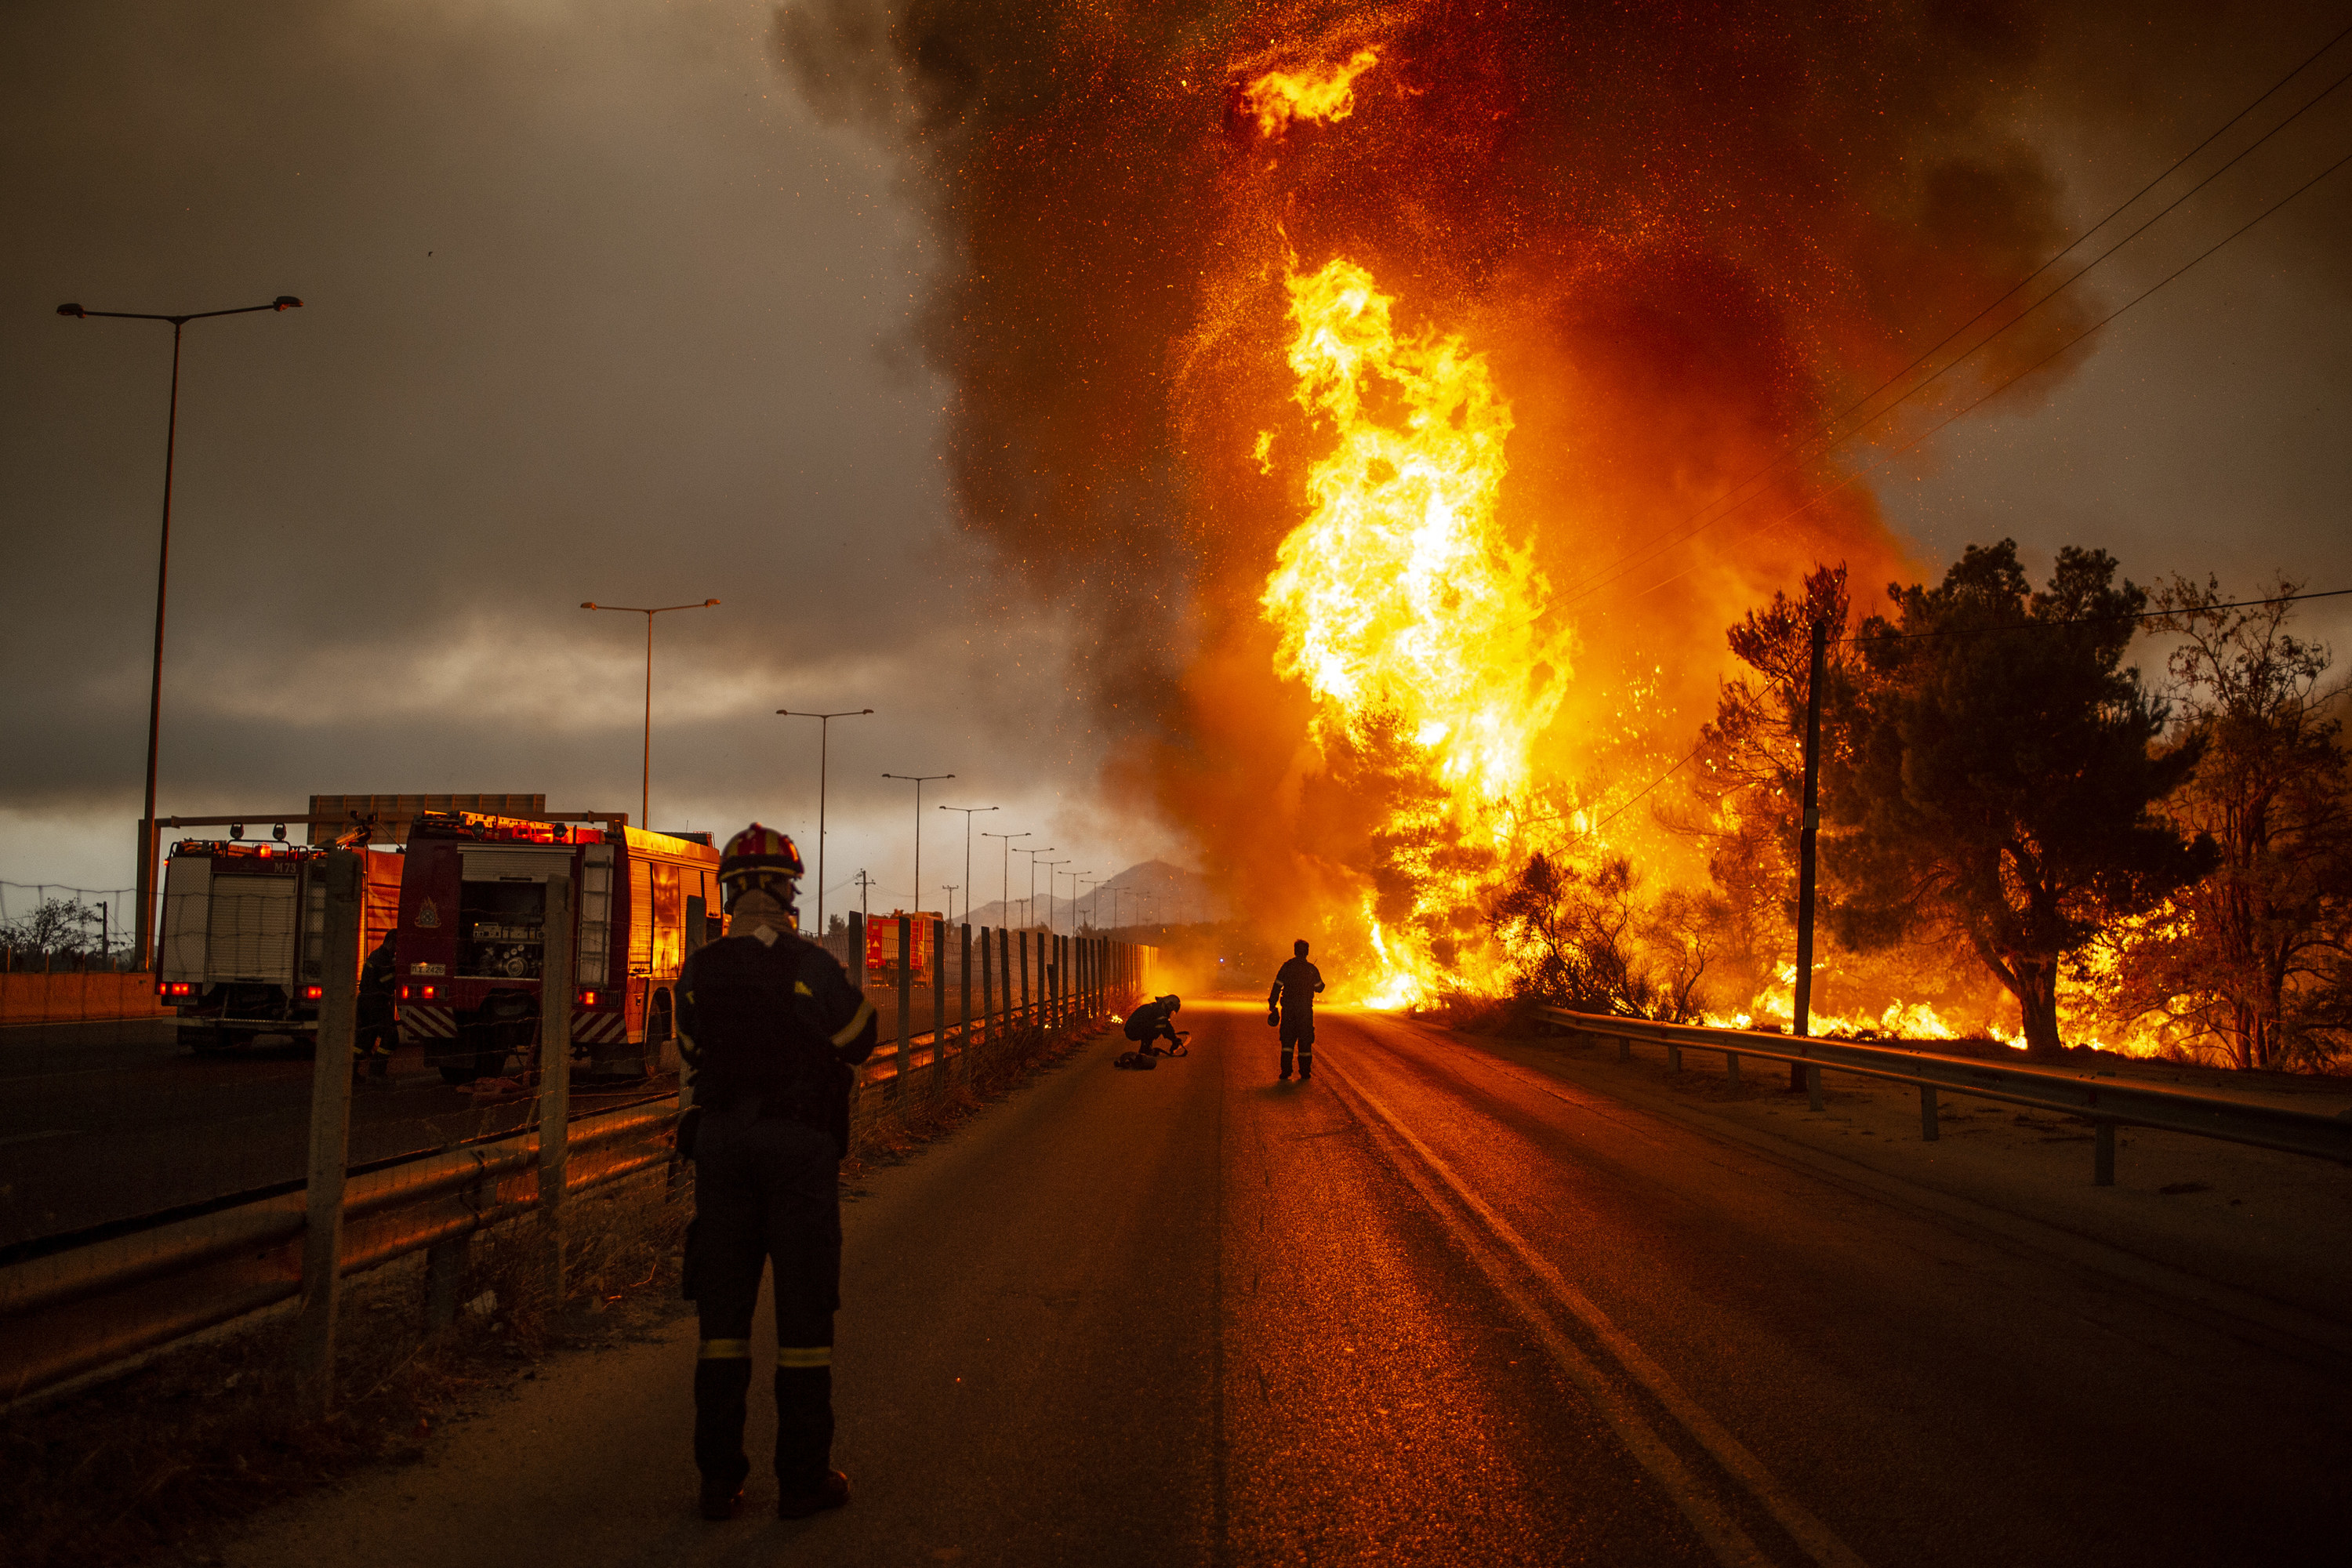 A firefighter stands at the side of a main road as flames shoot up into the sky several meters in front of them